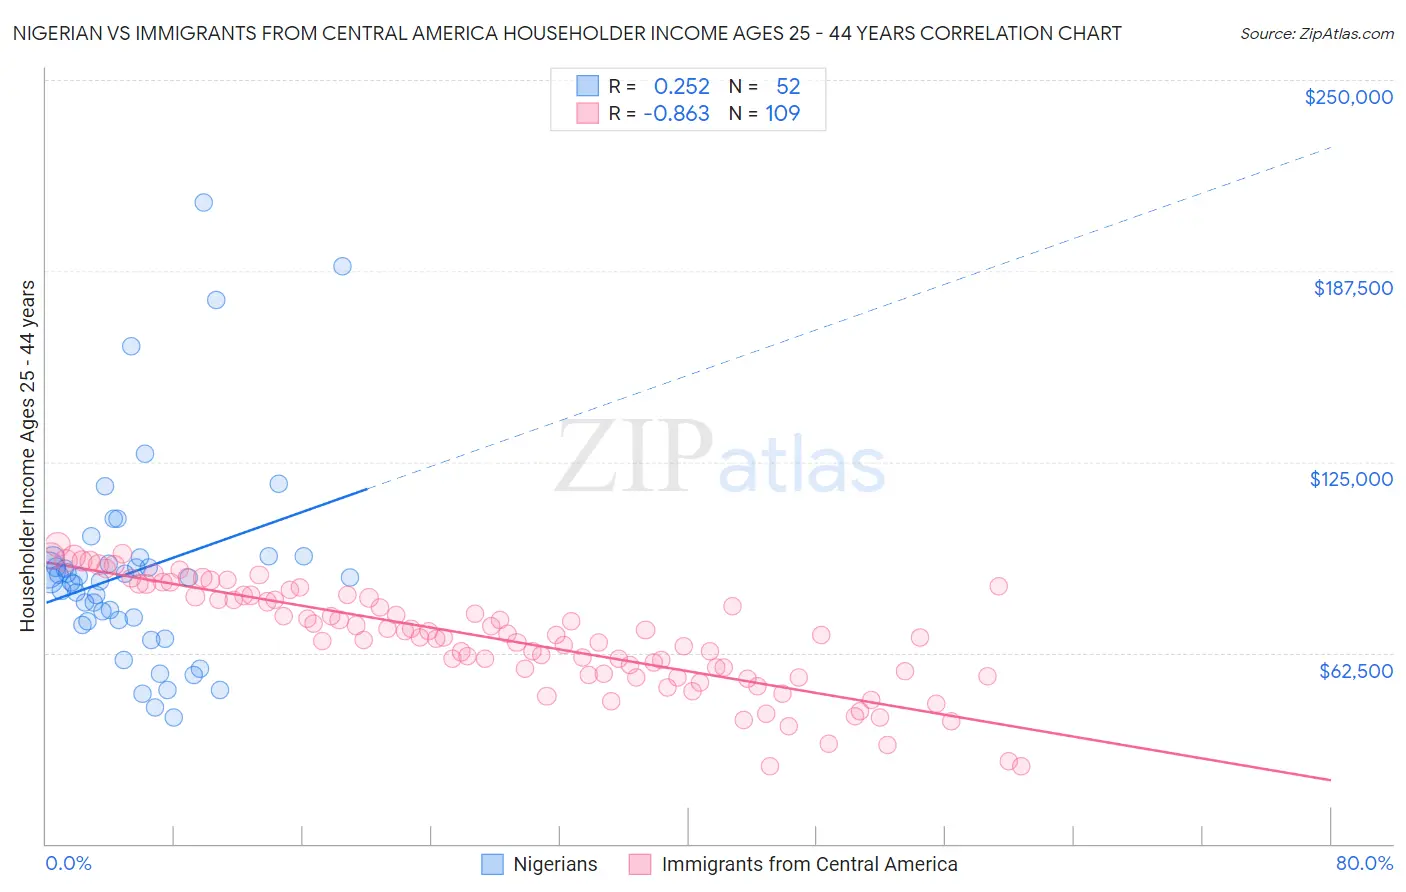 Nigerian vs Immigrants from Central America Householder Income Ages 25 - 44 years